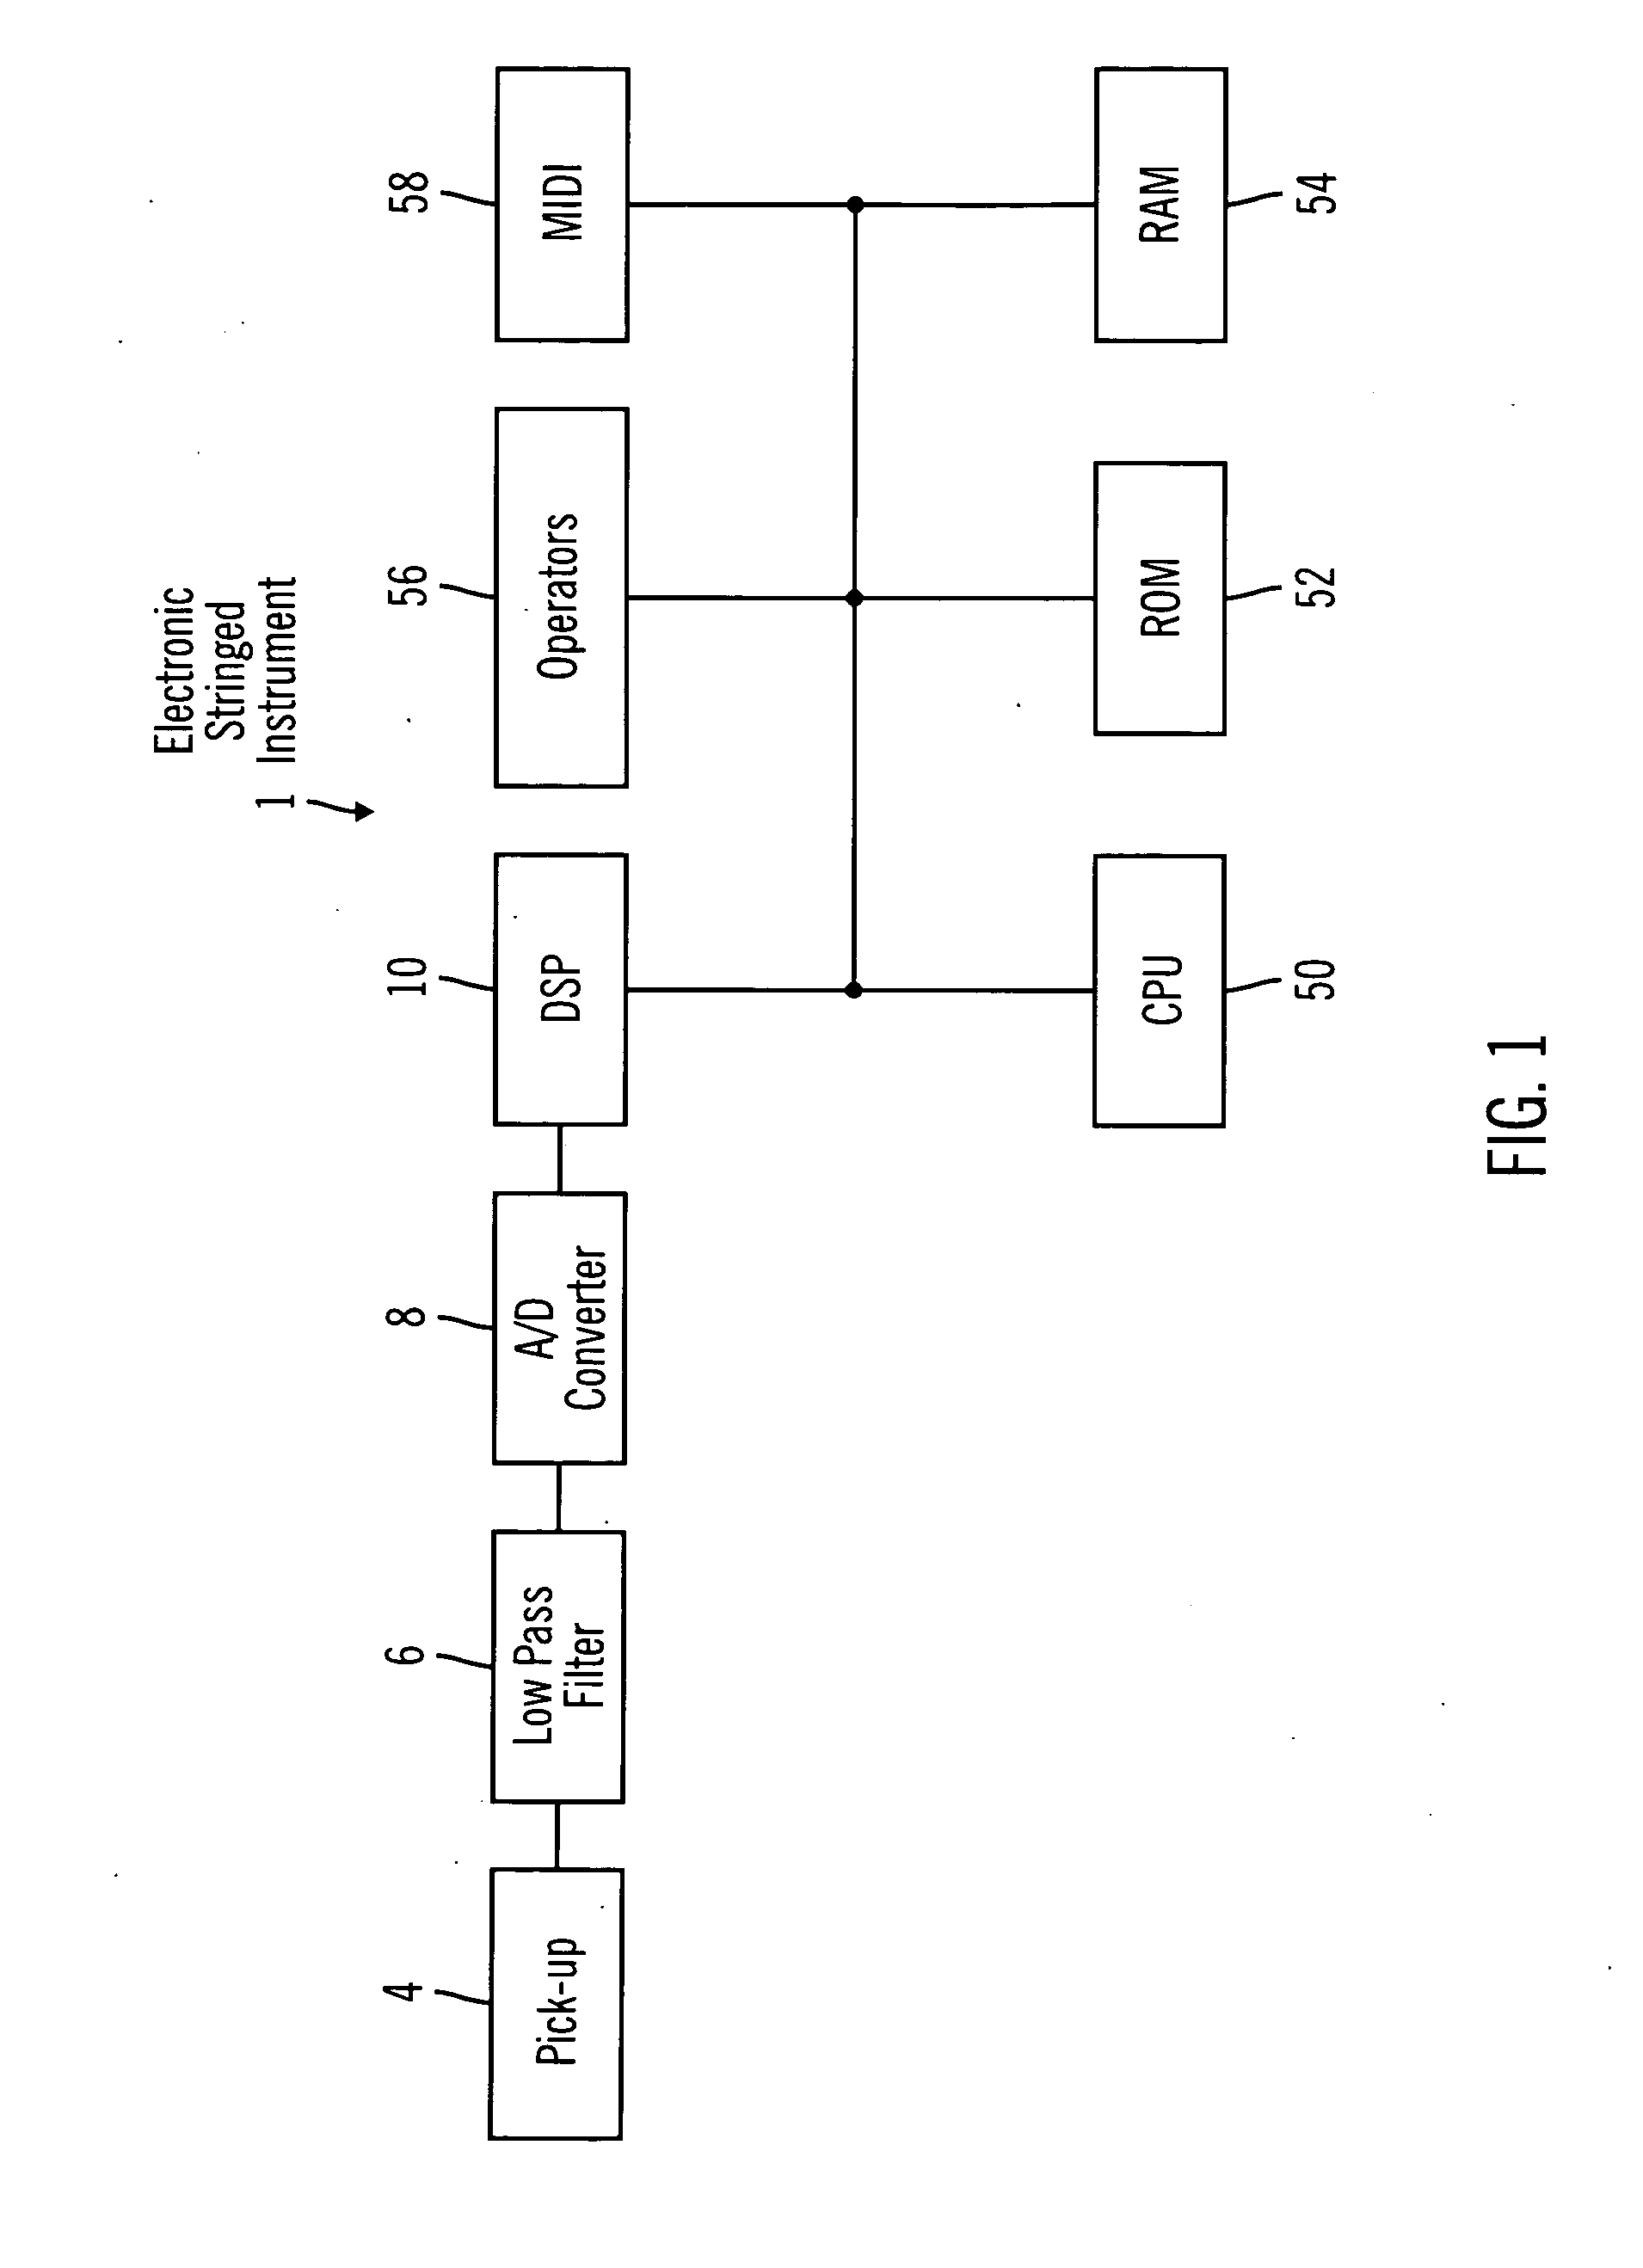 Electronic stringed instrument, system, and method with note height control